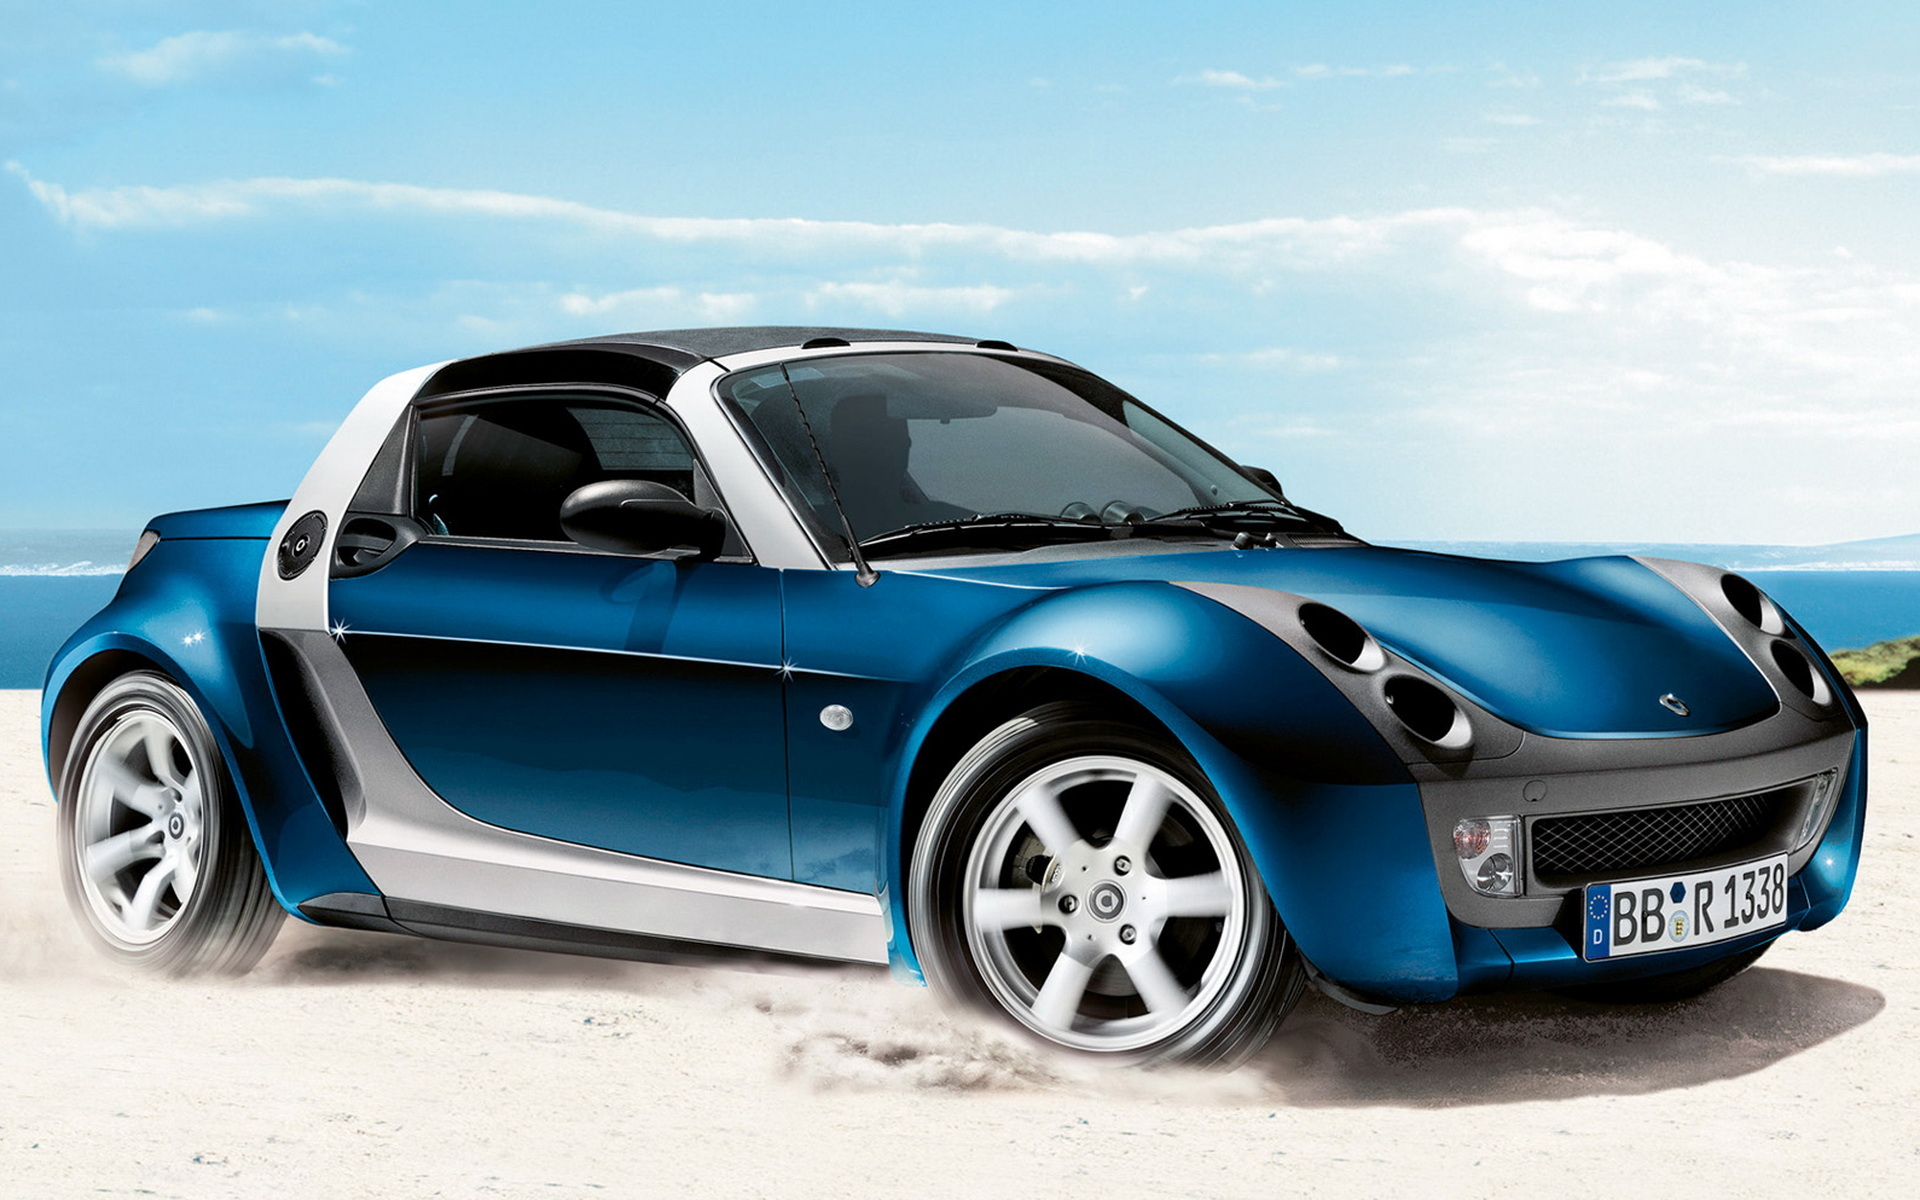 Smart Roadster Bluestar wallpapers and images   wallpapers pictures 1920x1200